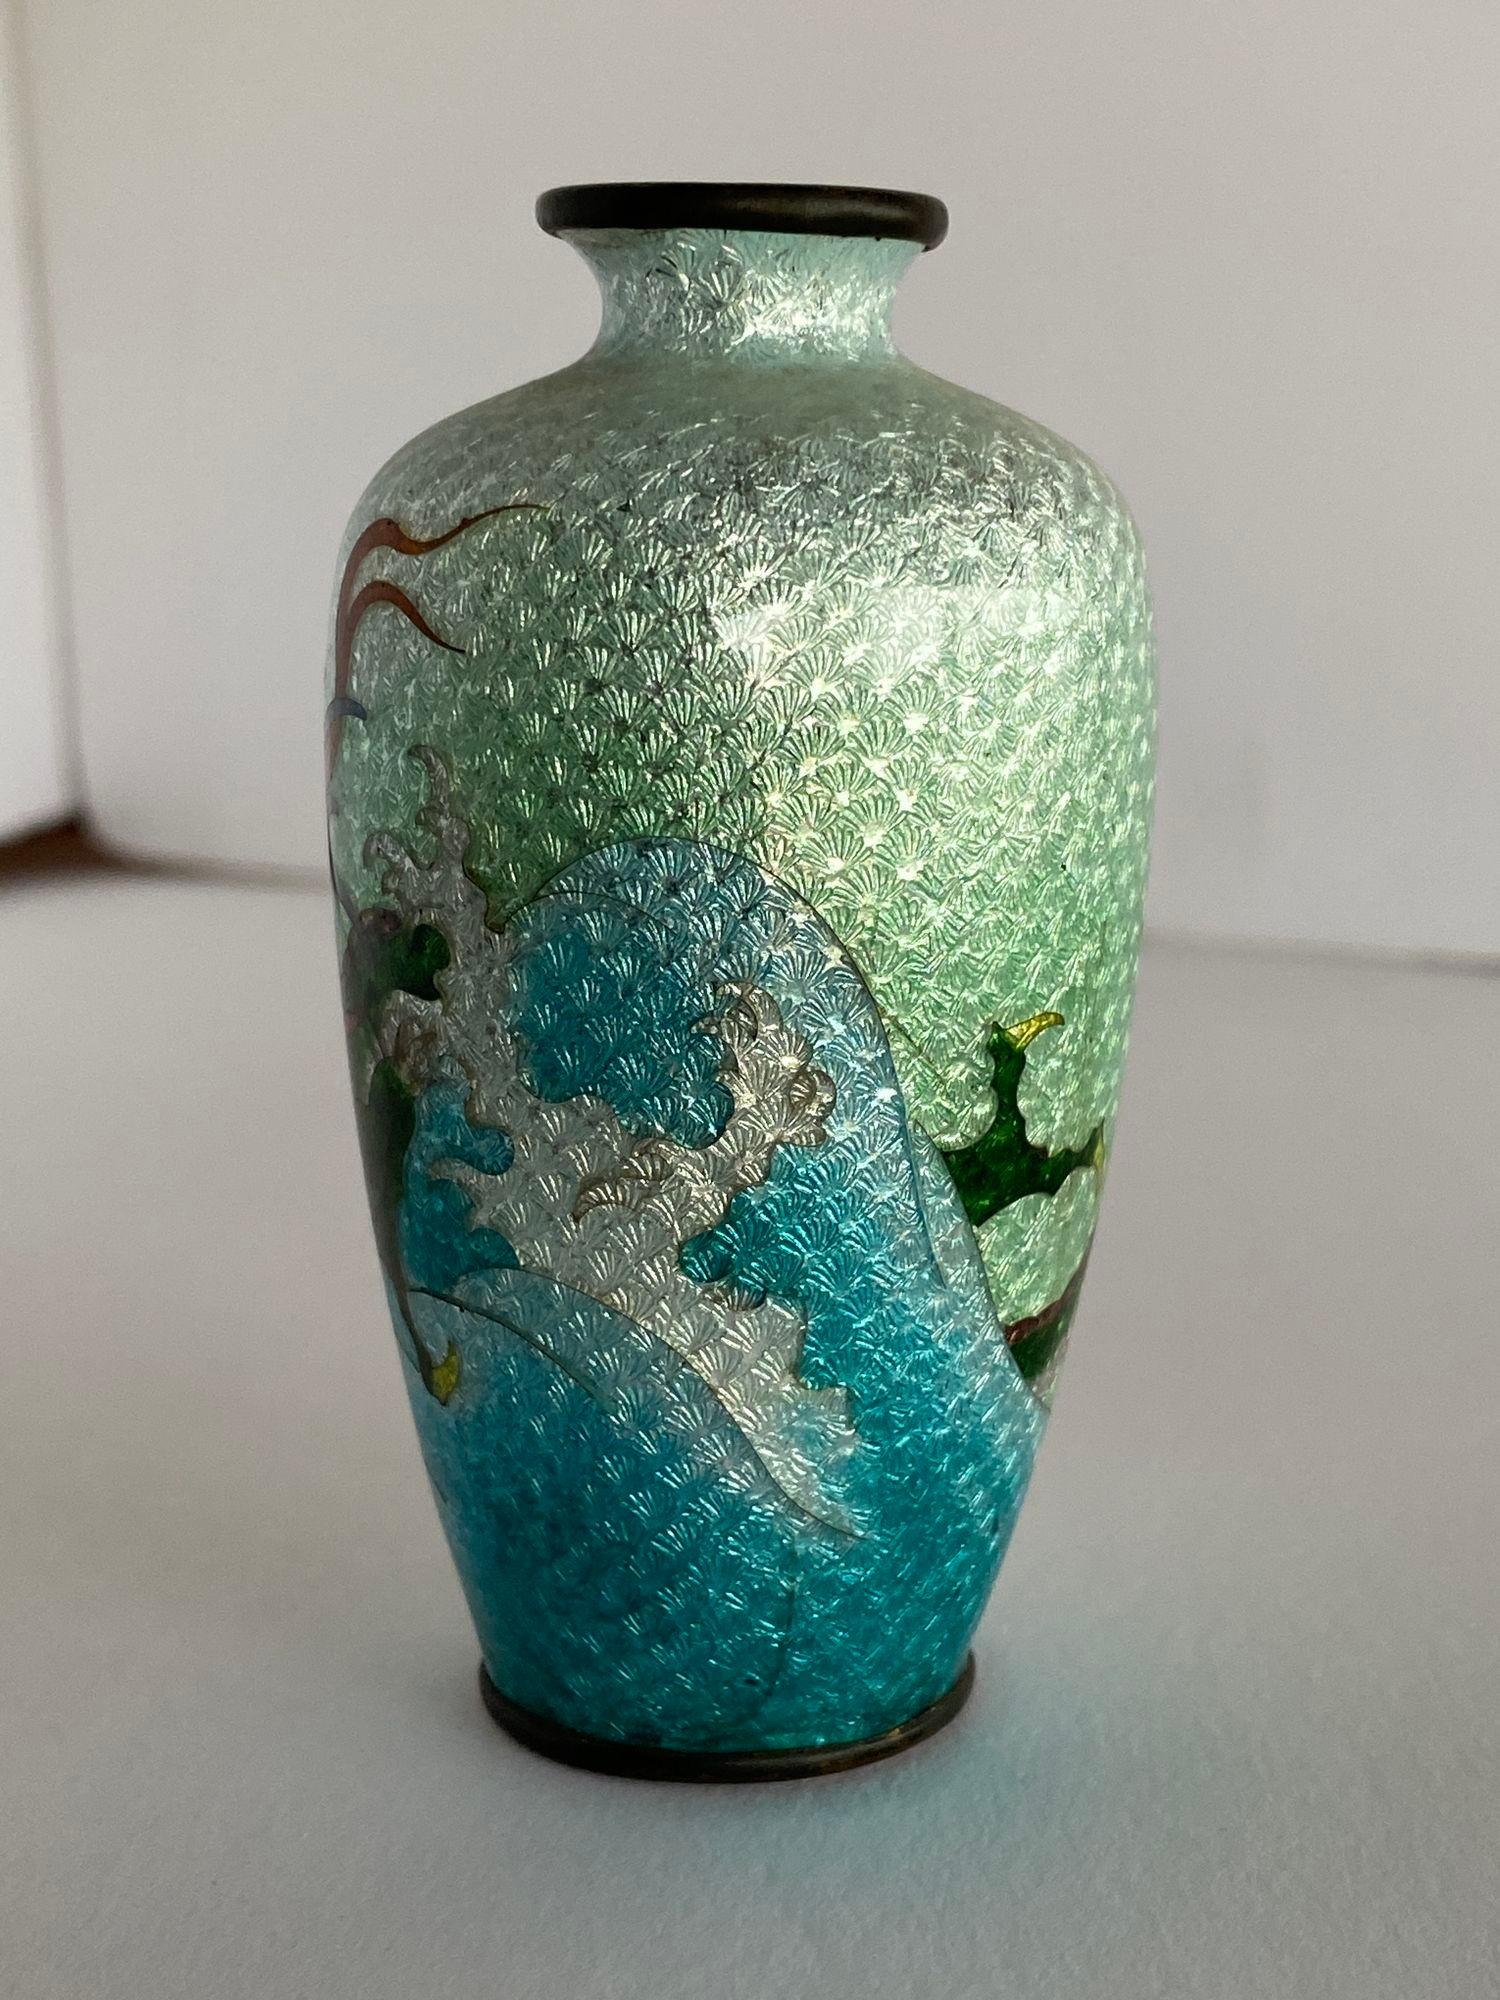 Post War Brass Japanese Dragon Cloisonné Vase with scenic of a dragon flying through the sky.
 
 
Crica 1900
dimensions are 4.25